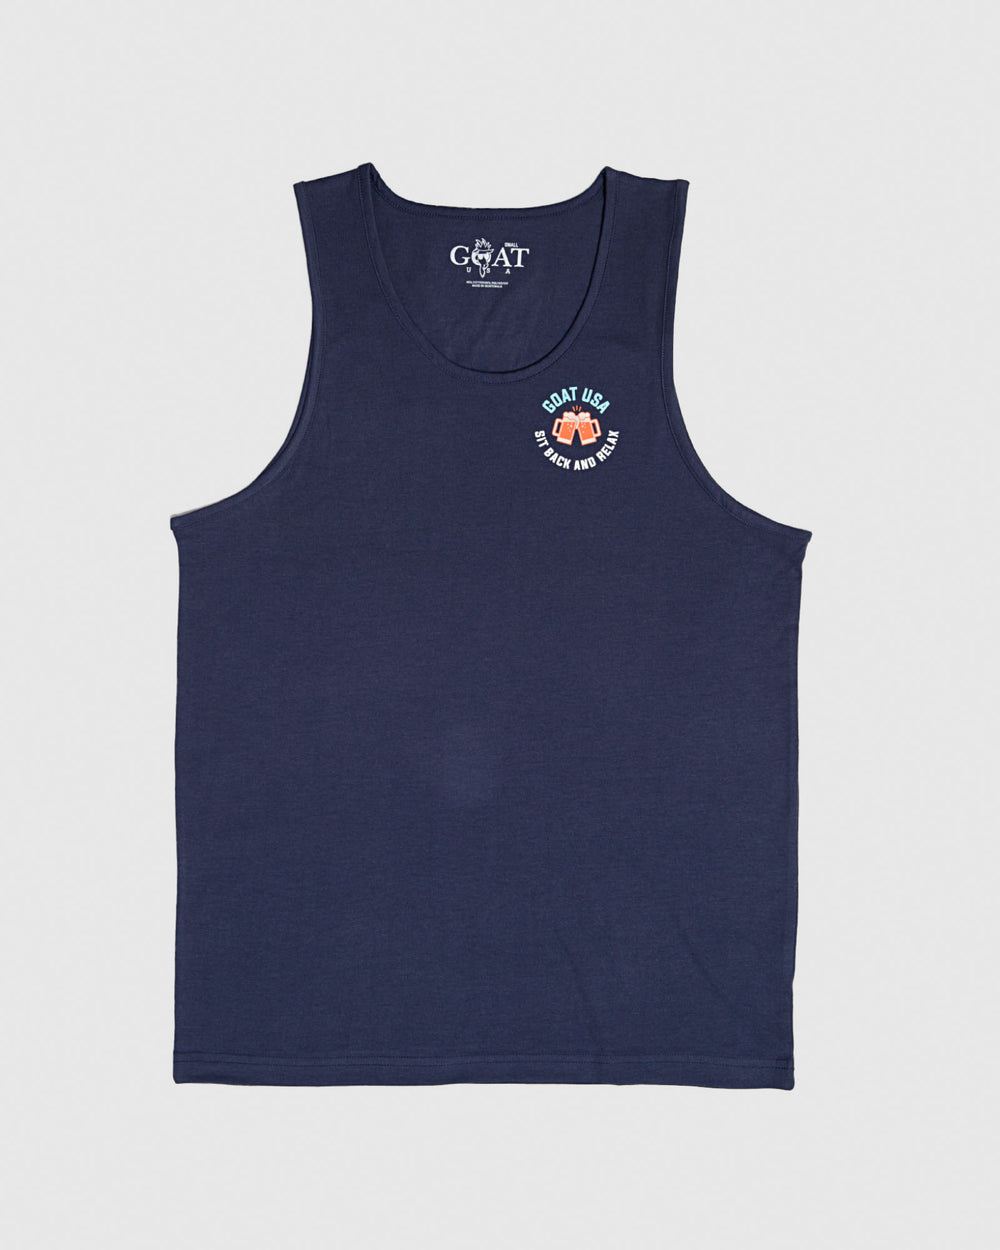 Frontside of navy tank top with two mugs toasting